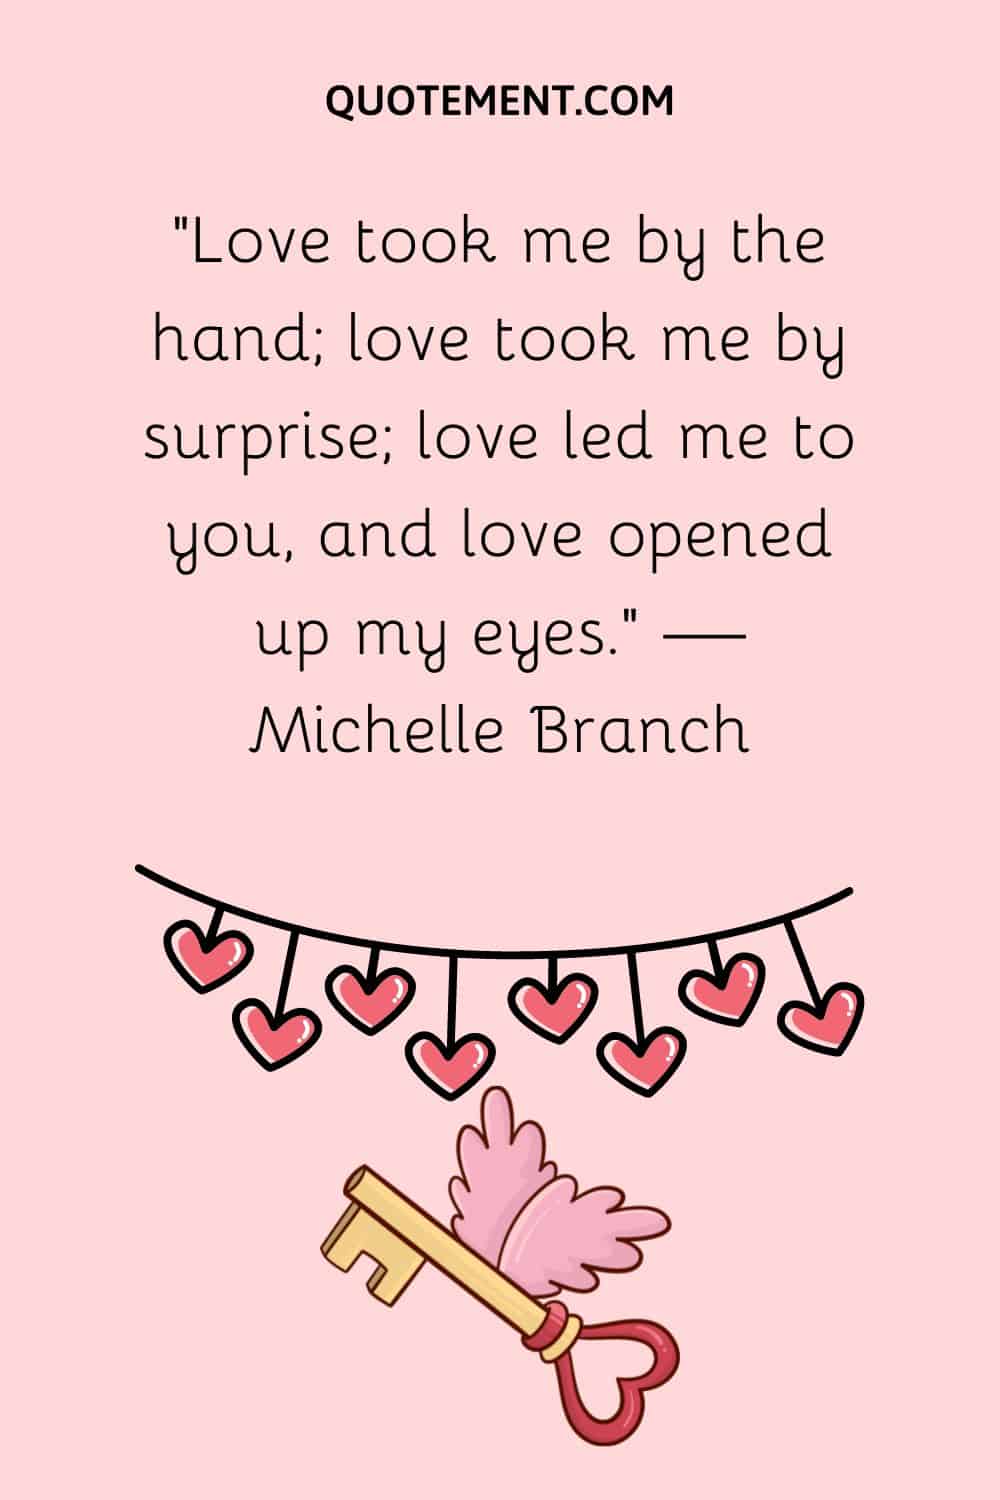 “Love took me by the hand; love took me by surprise; love led me to you, and love opened up my eyes.” — Michelle Branch